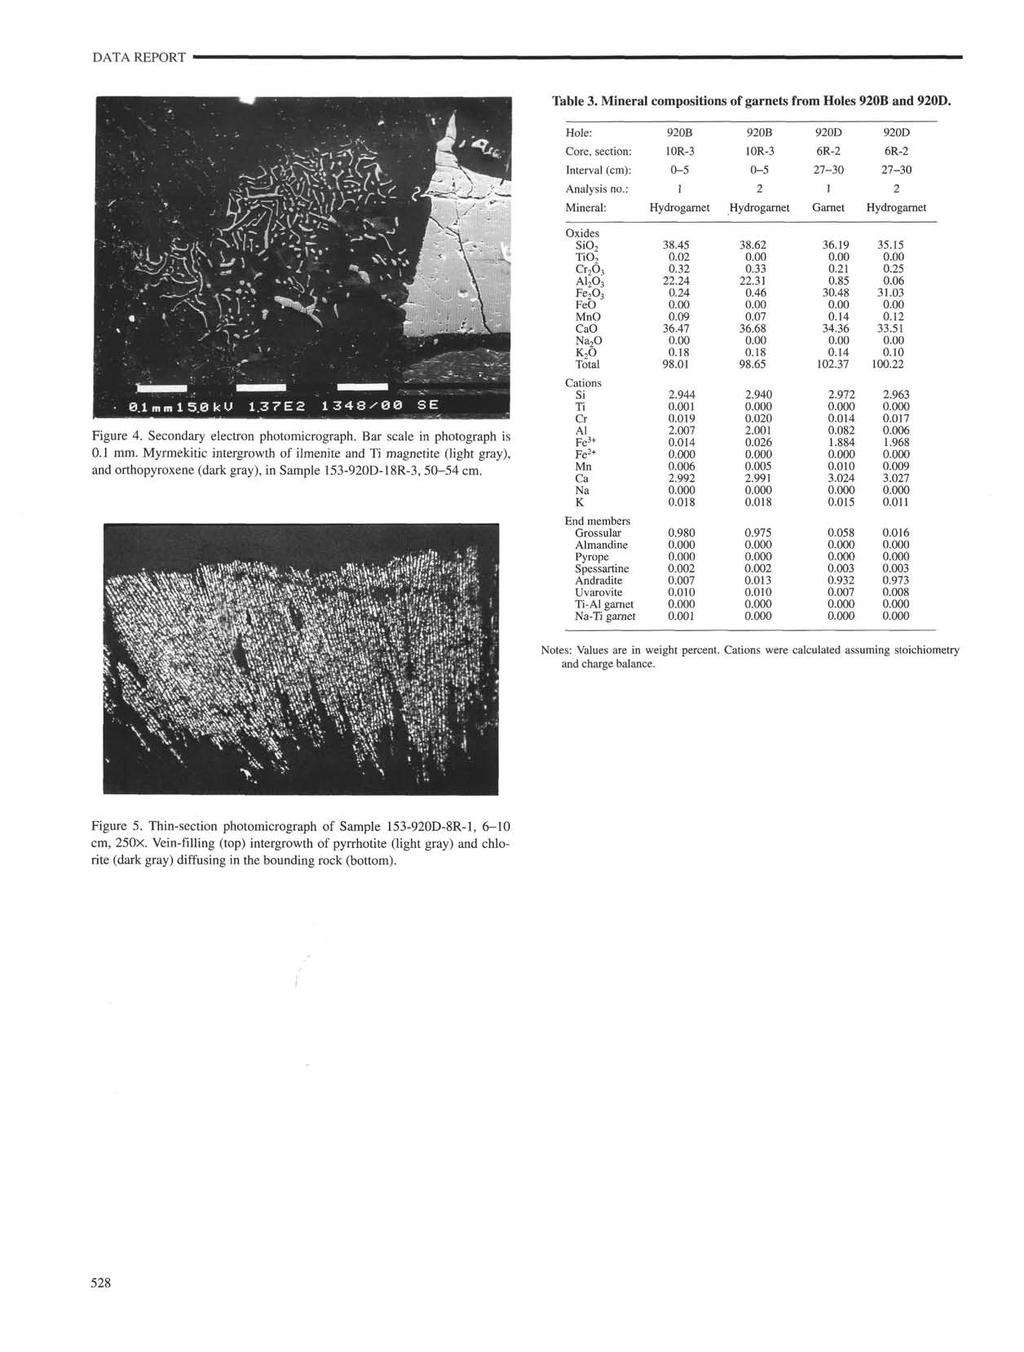 Table. Mineral compositions of garnets from Holes and. Hole: Core, section: Interval (cm): 0R- 0-5 0R- 0-5 6R- 7-0 6R- 7-0 Mineral: Hydrogarnet Hydrogarnet Garnet Hydrogarnet Figure 4.